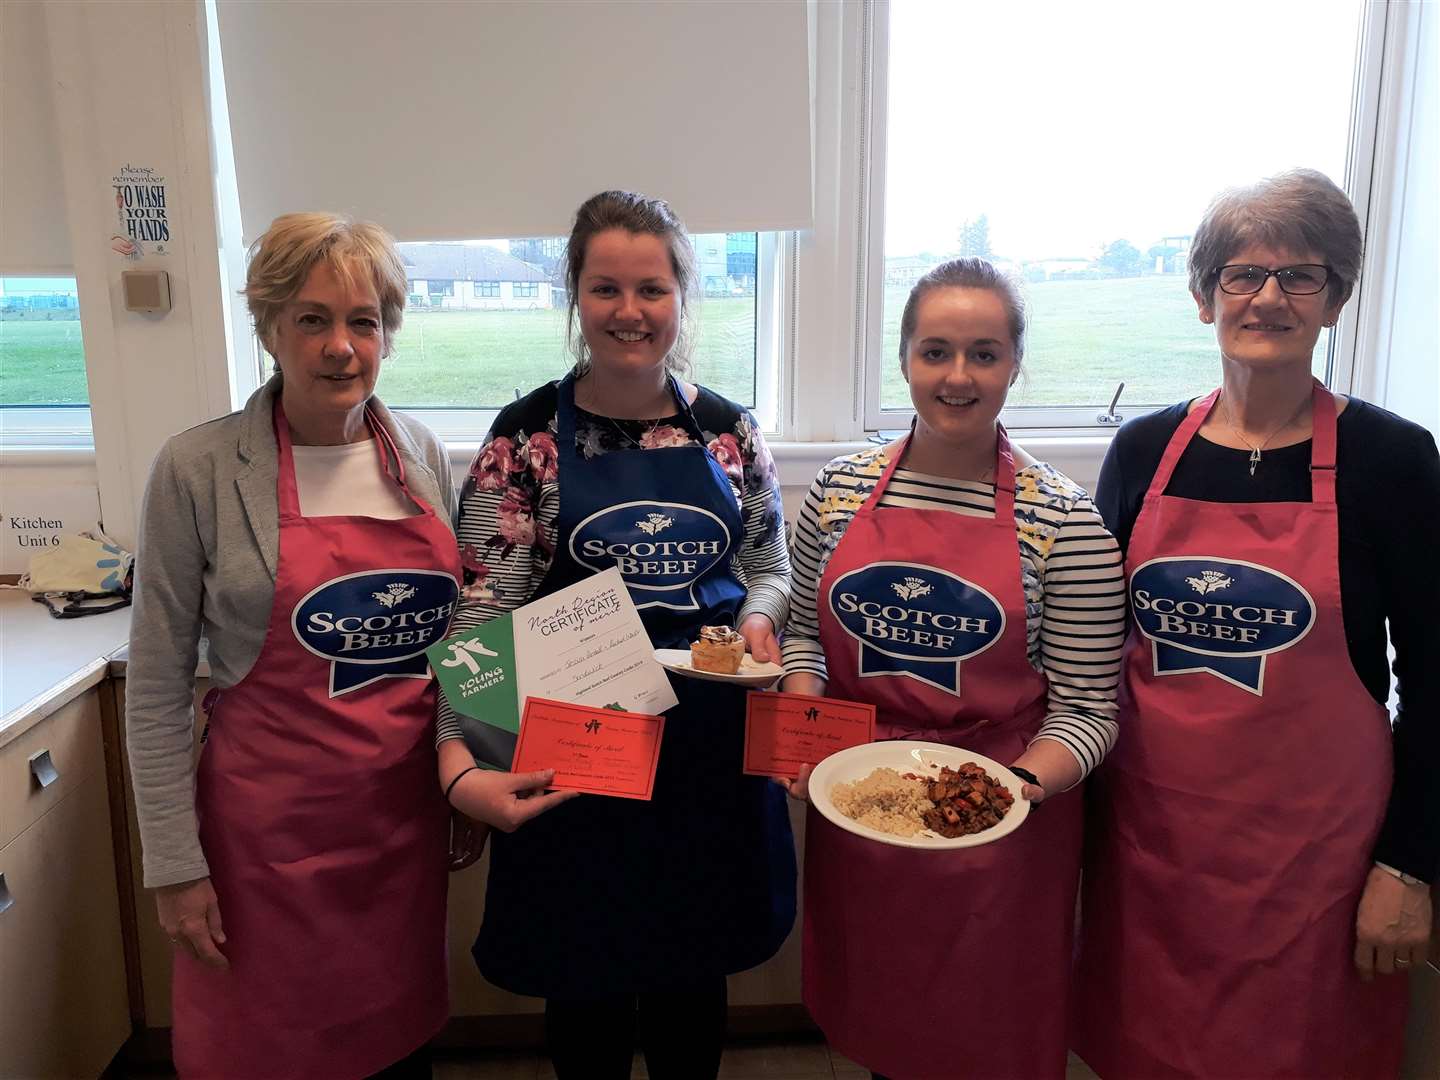 The winning team from Sandwick with the judges. From left: Anne Frew (judge), Rachel Isbister, Jessica Rendall and Helen Campbell (judge).